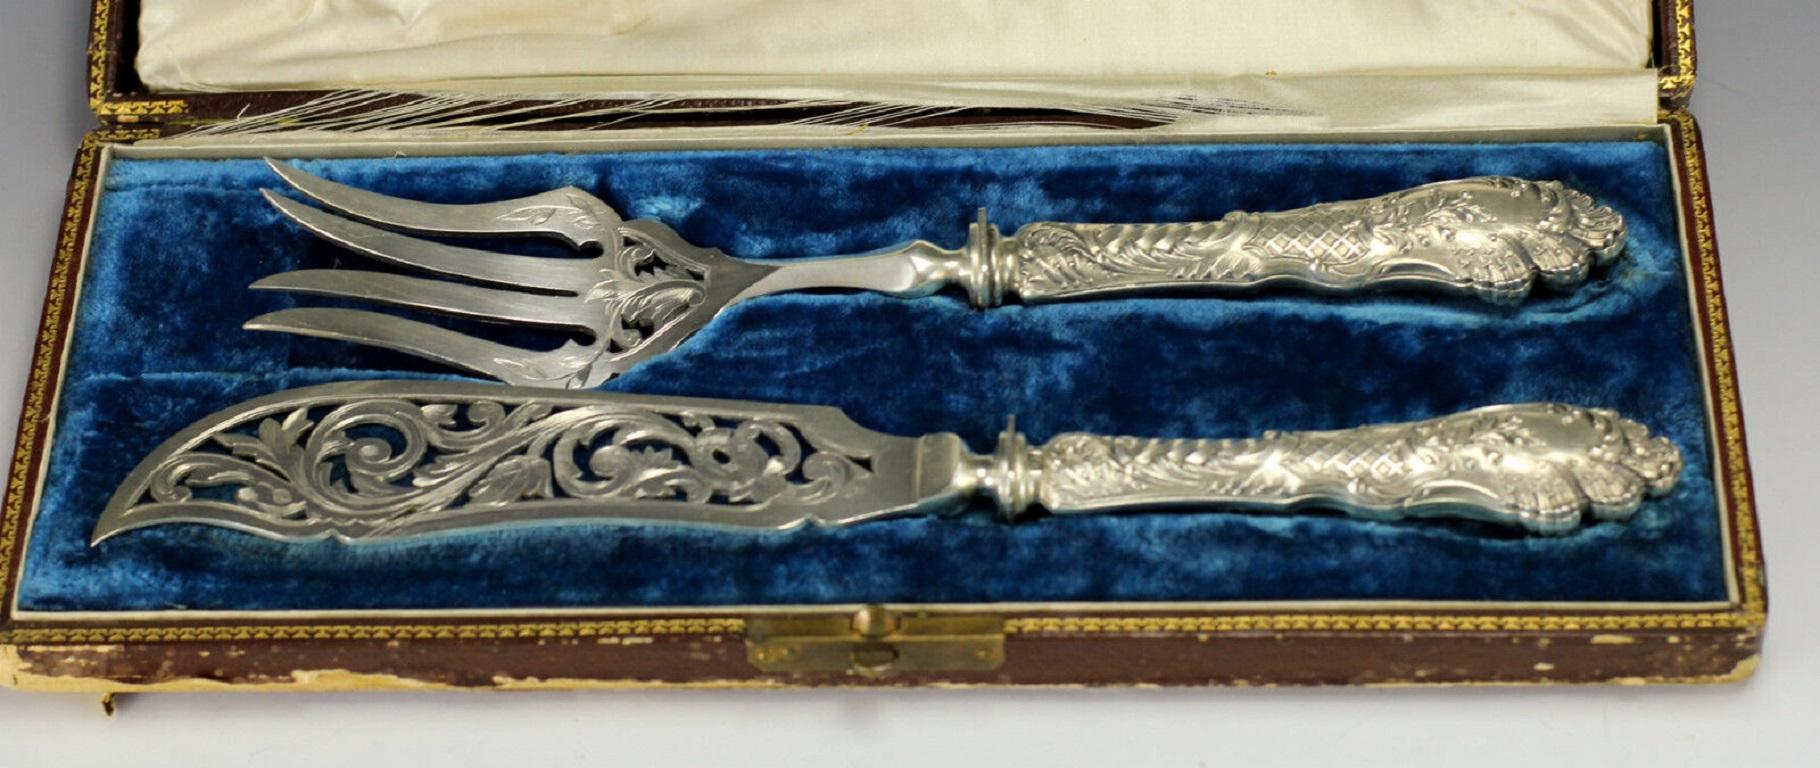 2pc Set French Sterling Silver Fish Servers Henri Dubret - Original Case, c1905 

Elegant Repousse Handles embellished with foliate scrolls, and twist fluted details. Reticulated blades feature hand engraved designs that complement the designs on